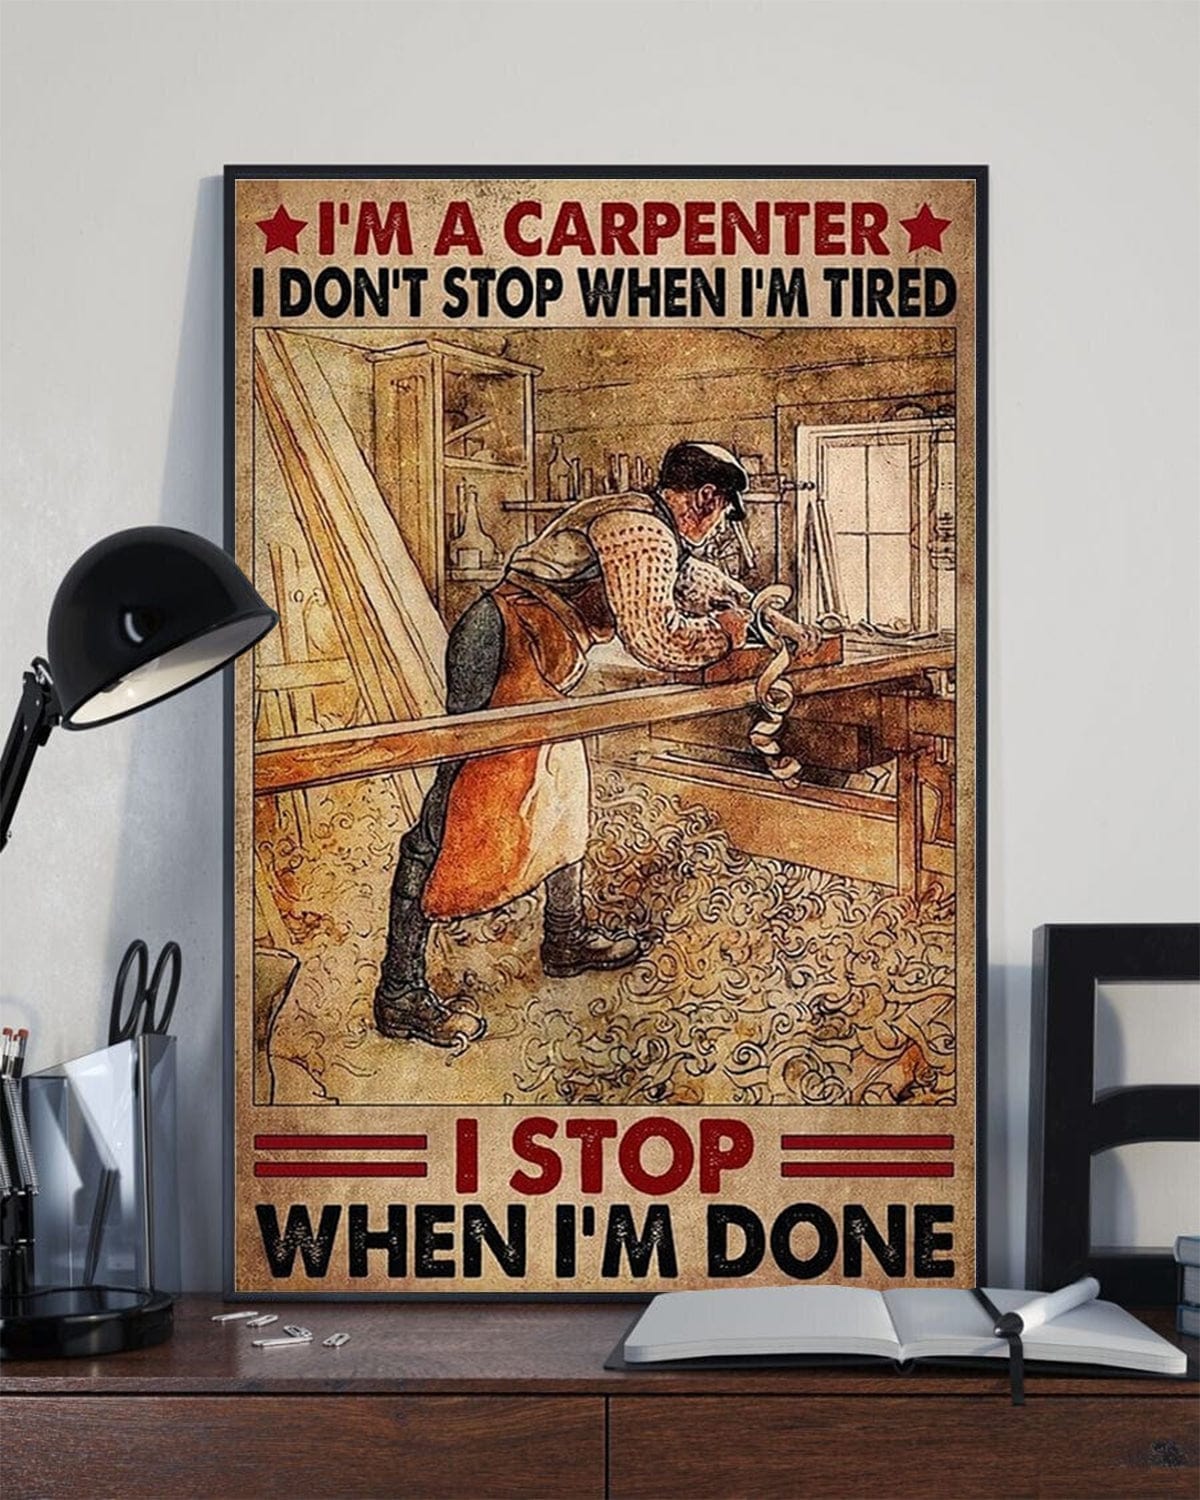 I'm A Carpenter I Don't Stop When I'm Tired I Stop When I'm Done Poster, Canvas